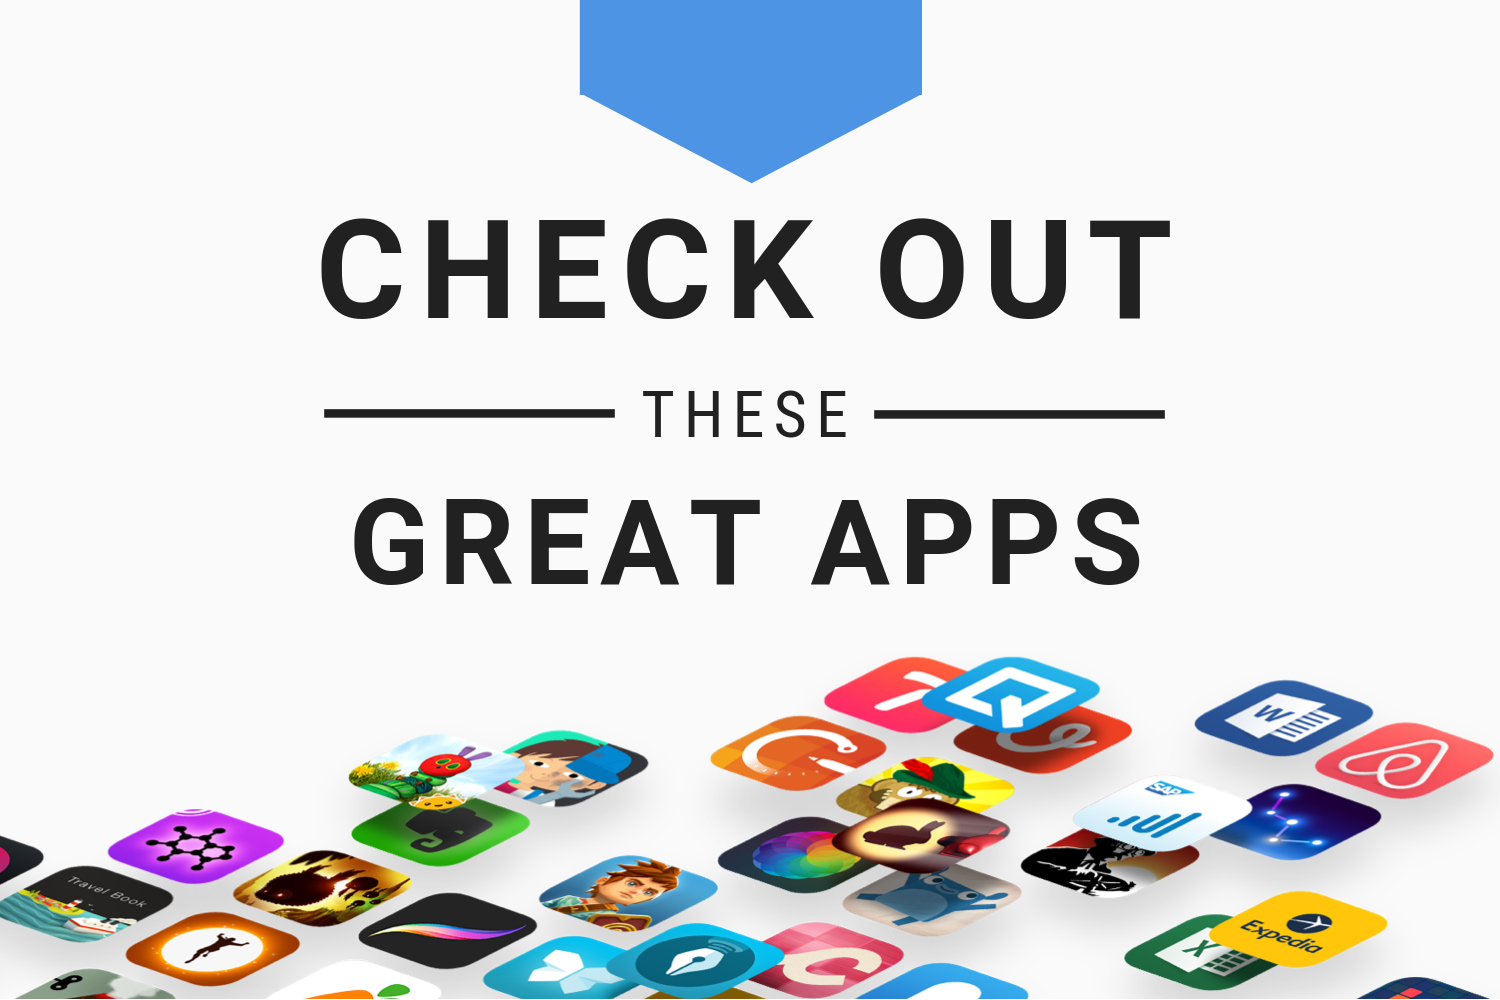 Answer Lens, Breath Confetti, Fragment app, and other apps to check out this weekend